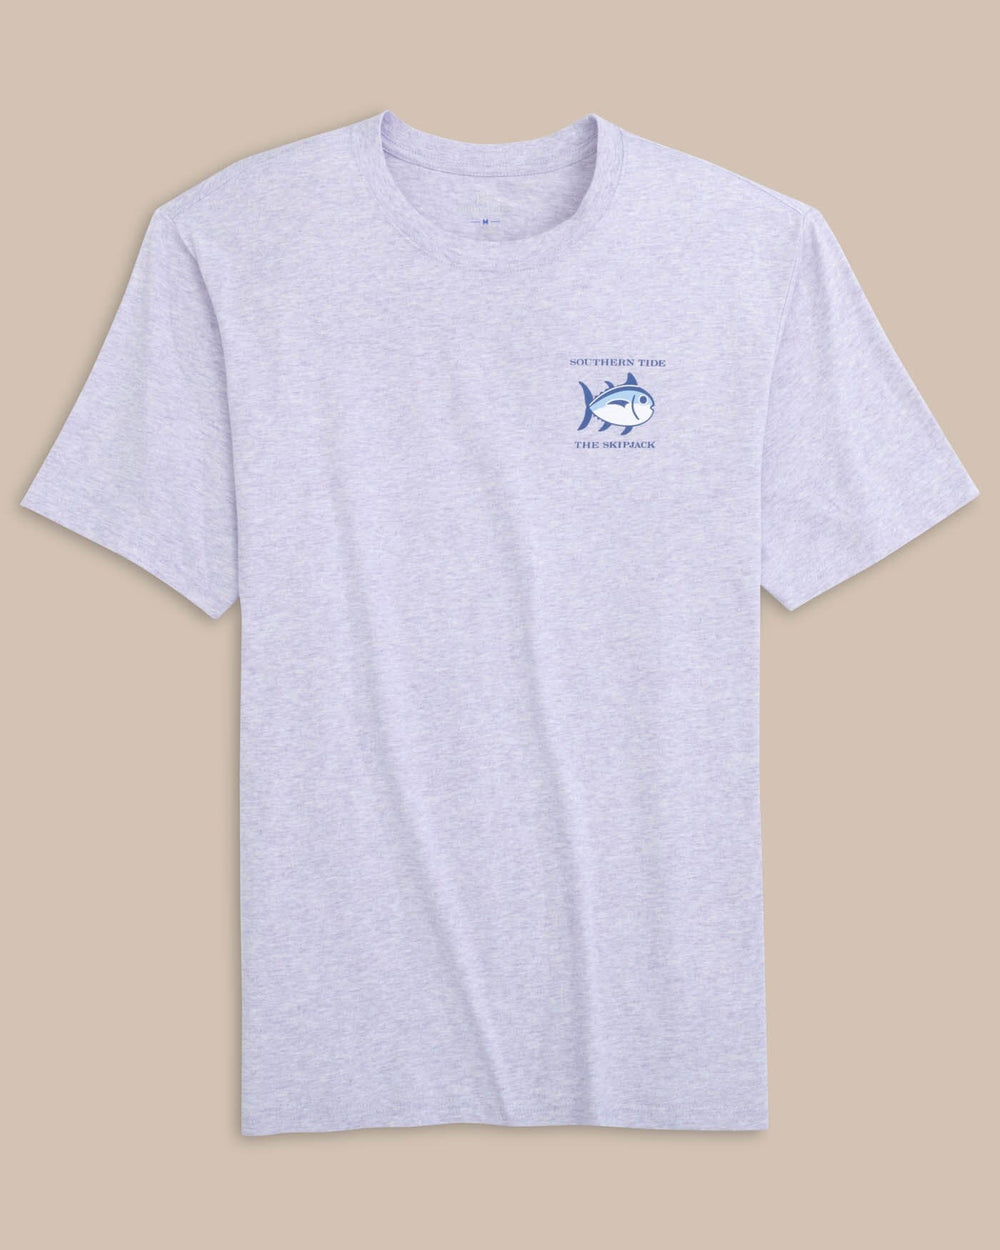 The front view of the Southern Tide Heather Original Skipjack T-Shirt by Southern Tide - Heather Wisteria Purple